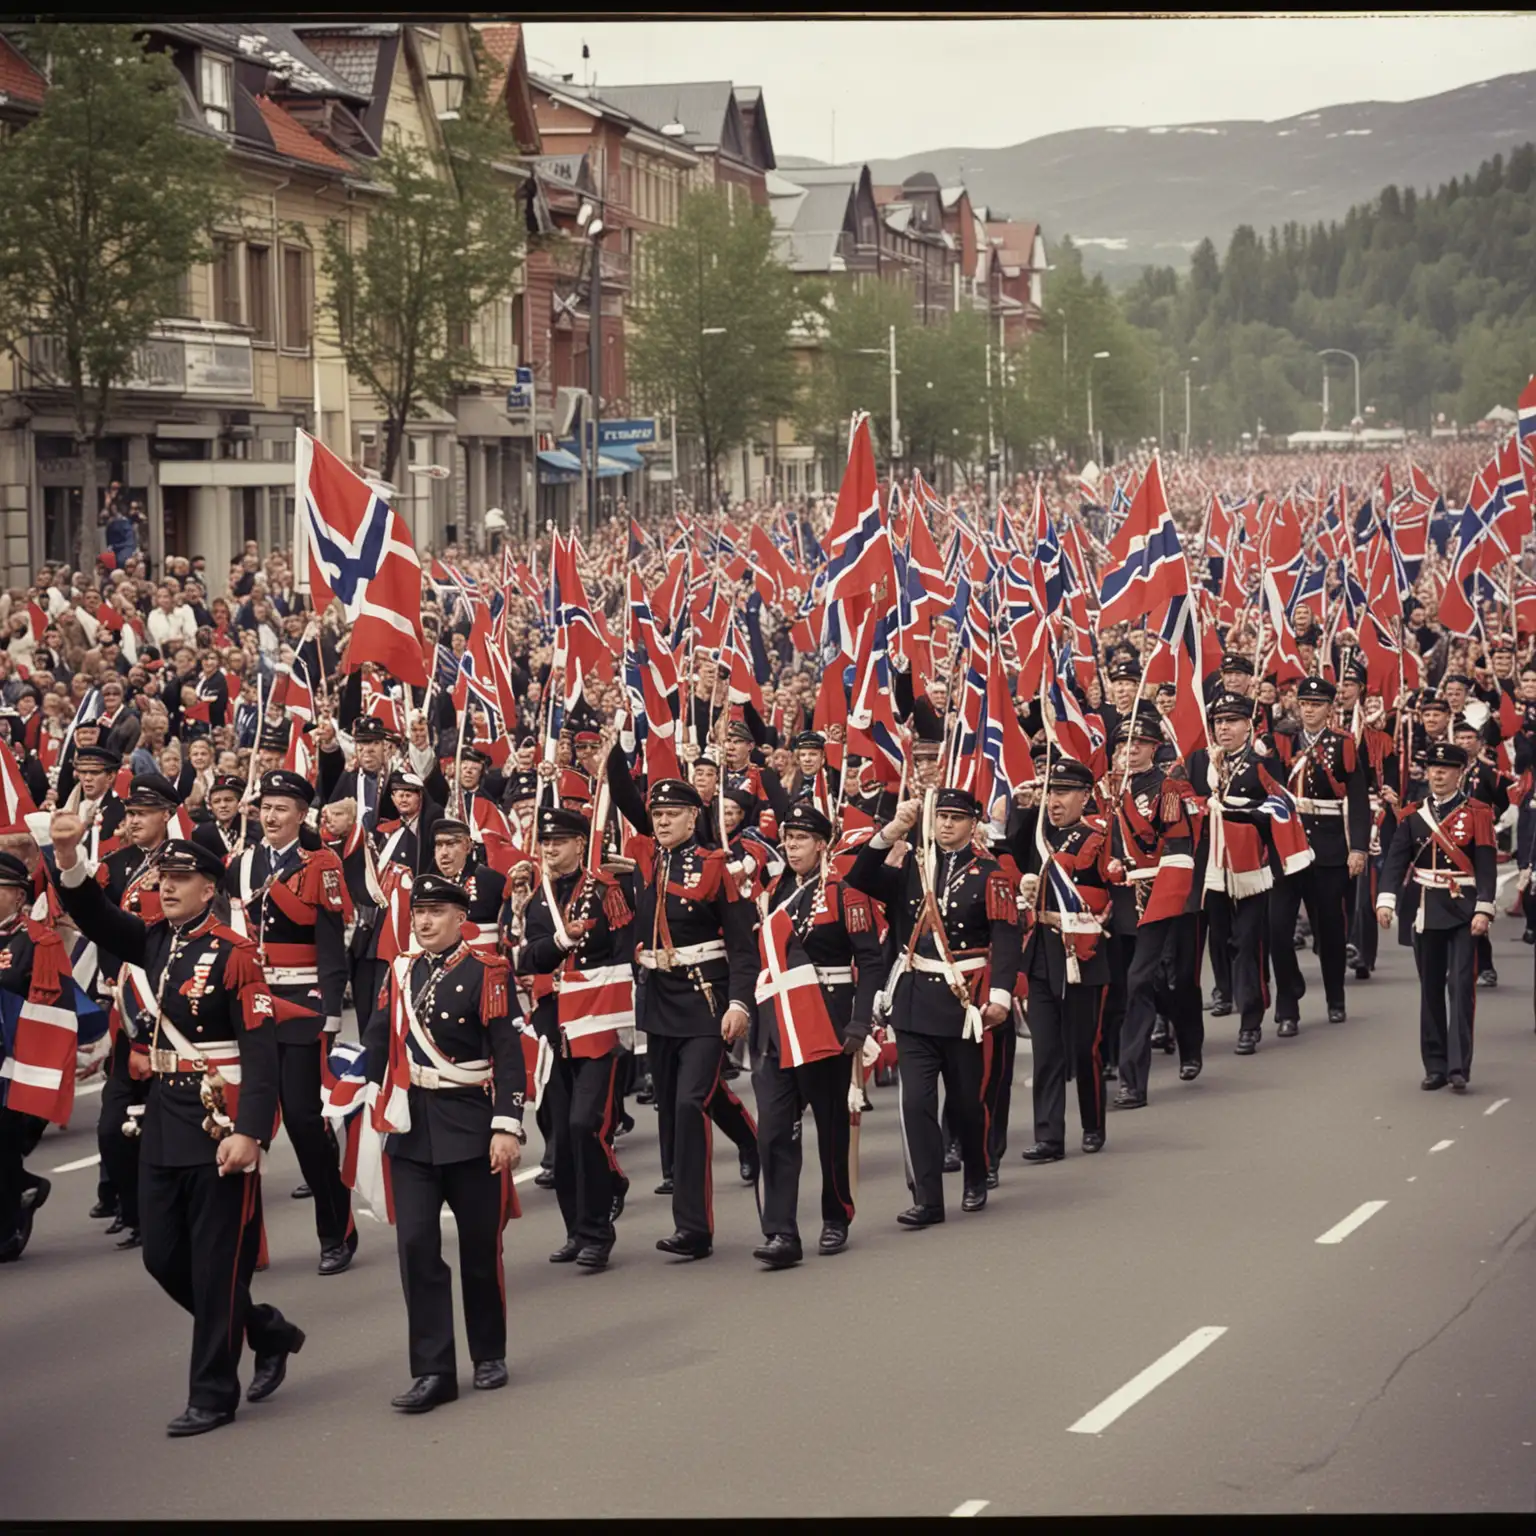 Norwegian 17th of May Parade Celebratory Crowd Waving Flags